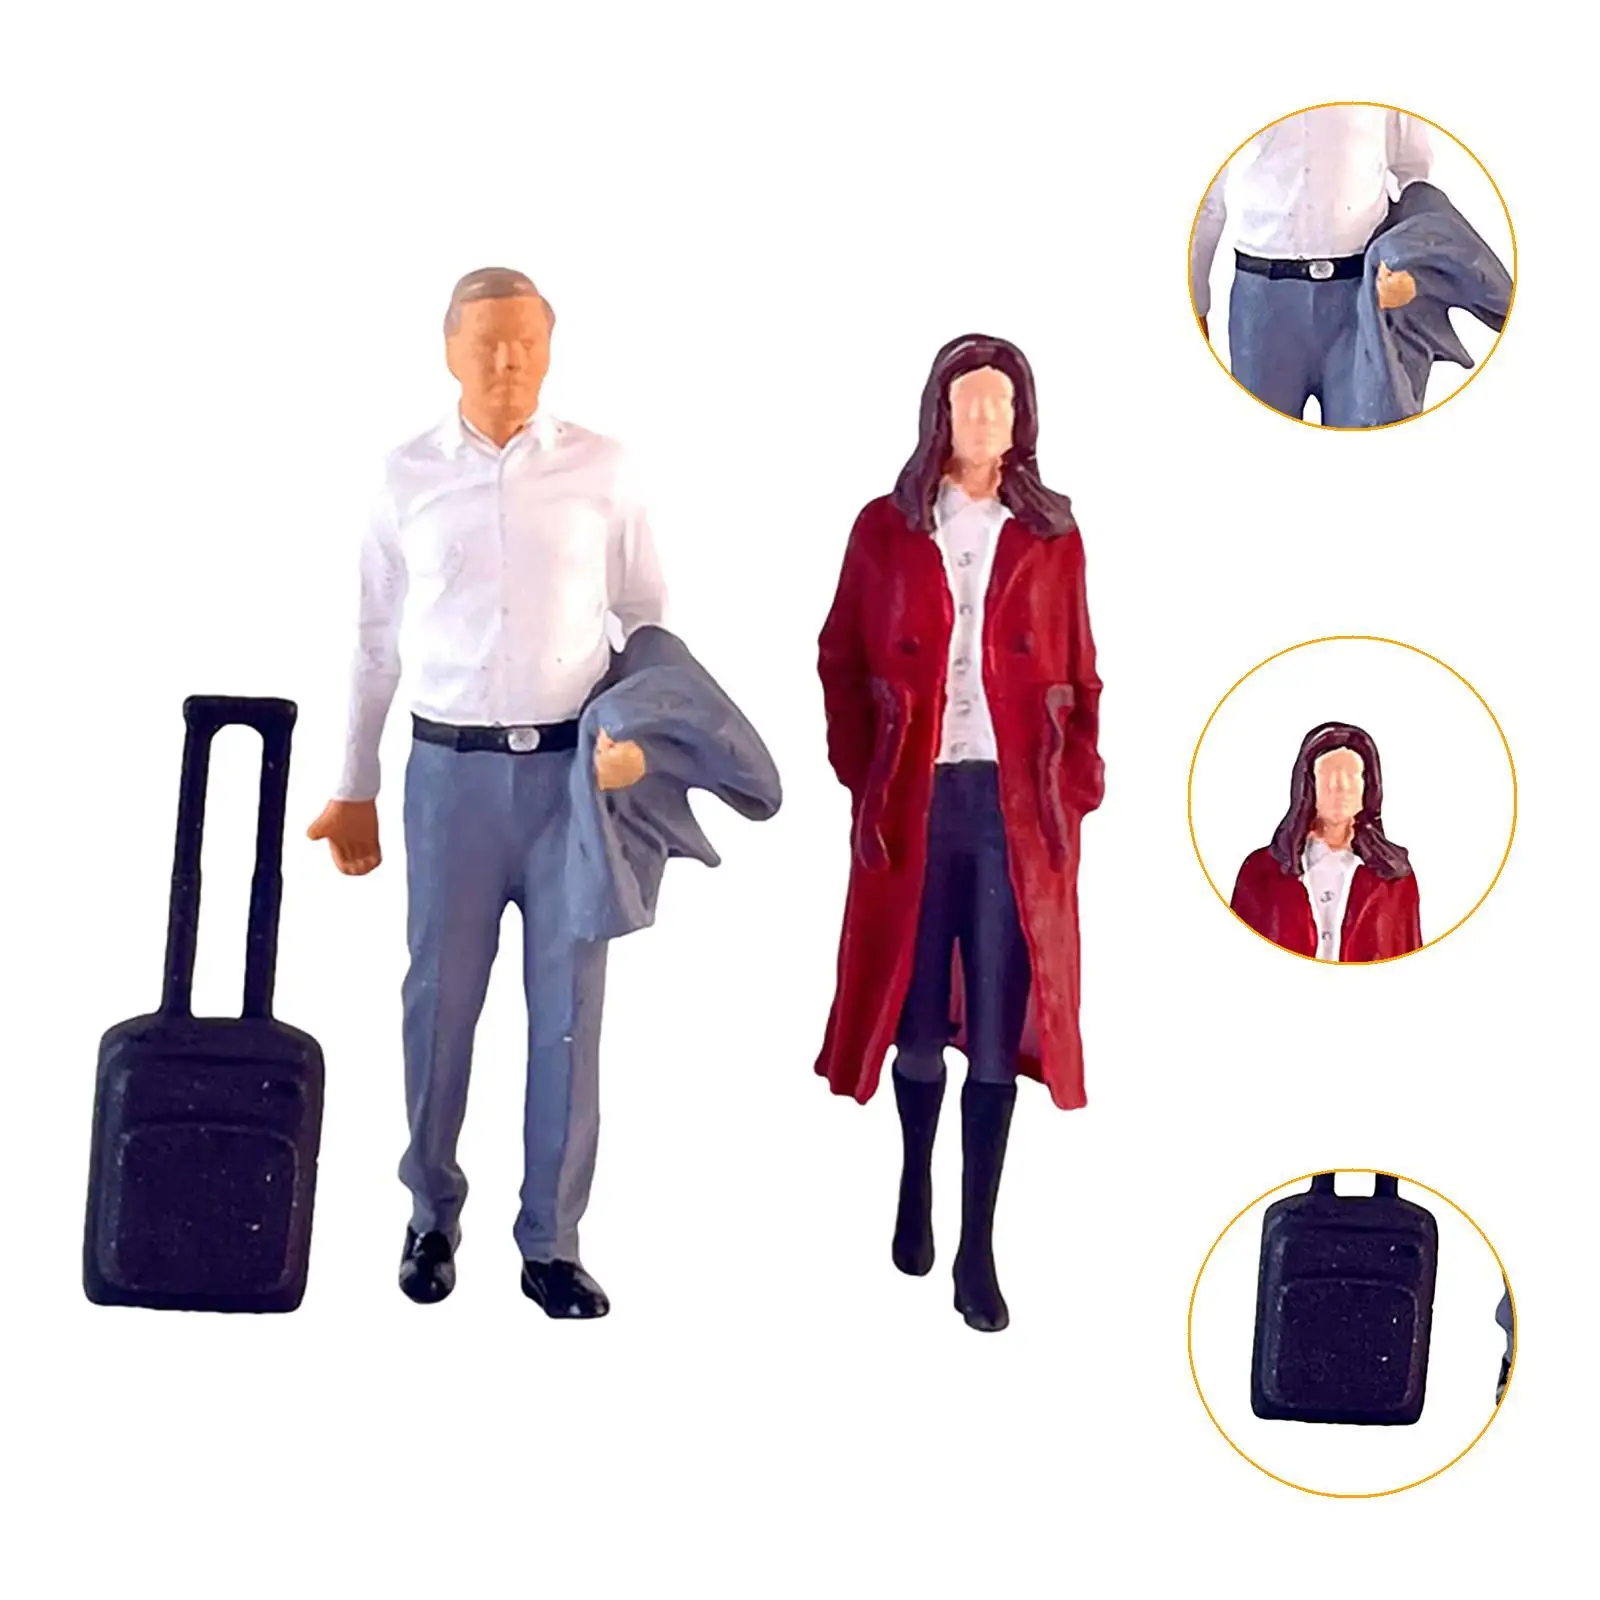 2x 1:64 Scale Women and Men Figures with Suitcase Model Micro Landscape Layout Collections Miniature Scenes Dioramas Decor